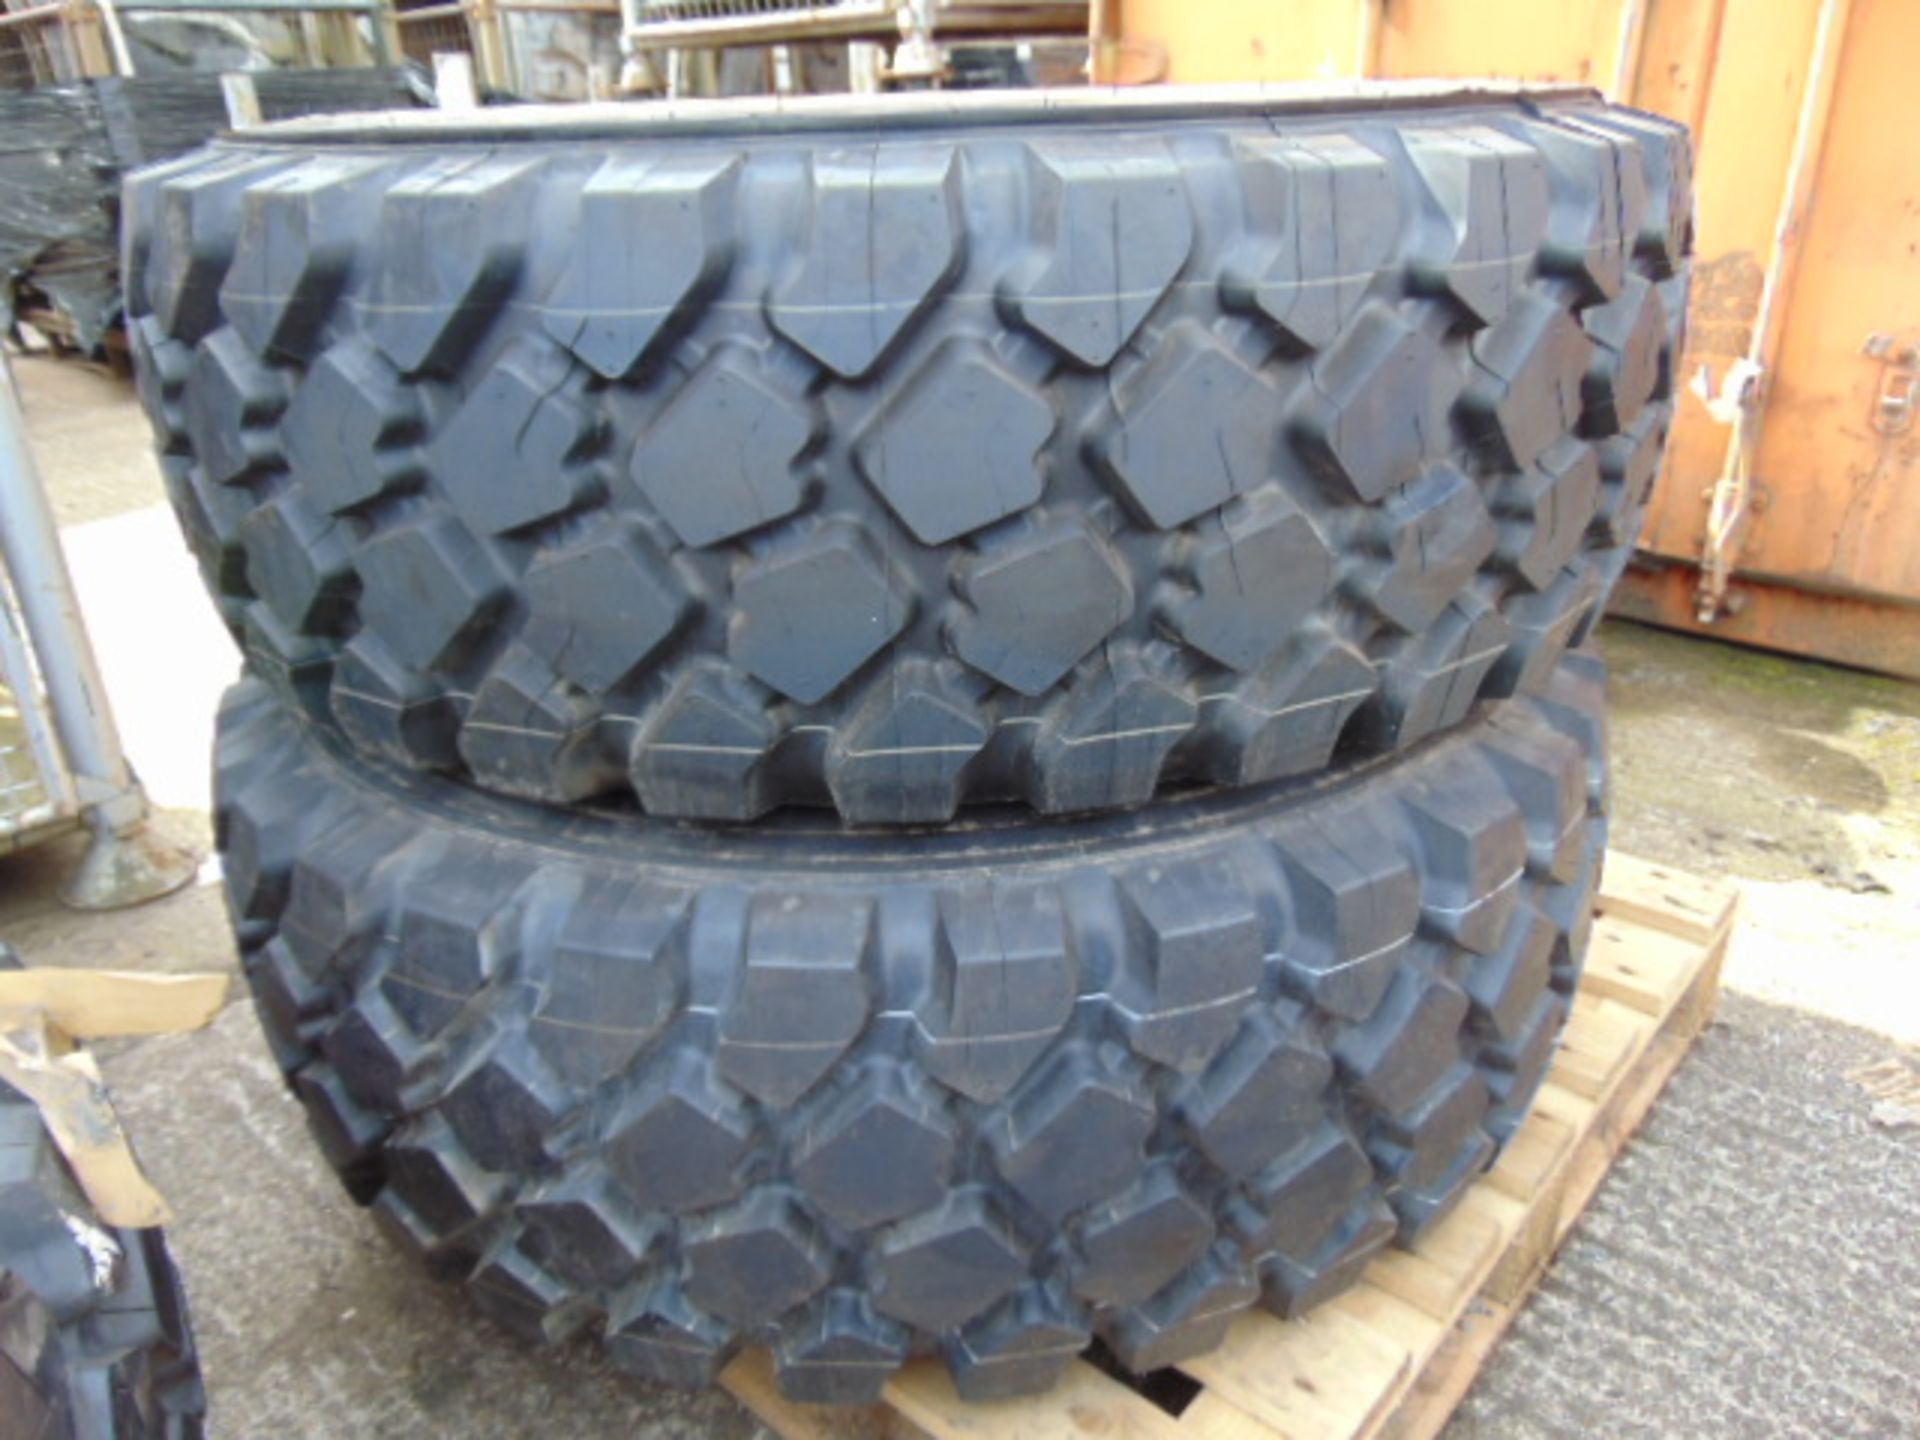 2 x Michelin 395/85 R20 XZL Tyres on 10 Stud Rims - Image 2 of 6